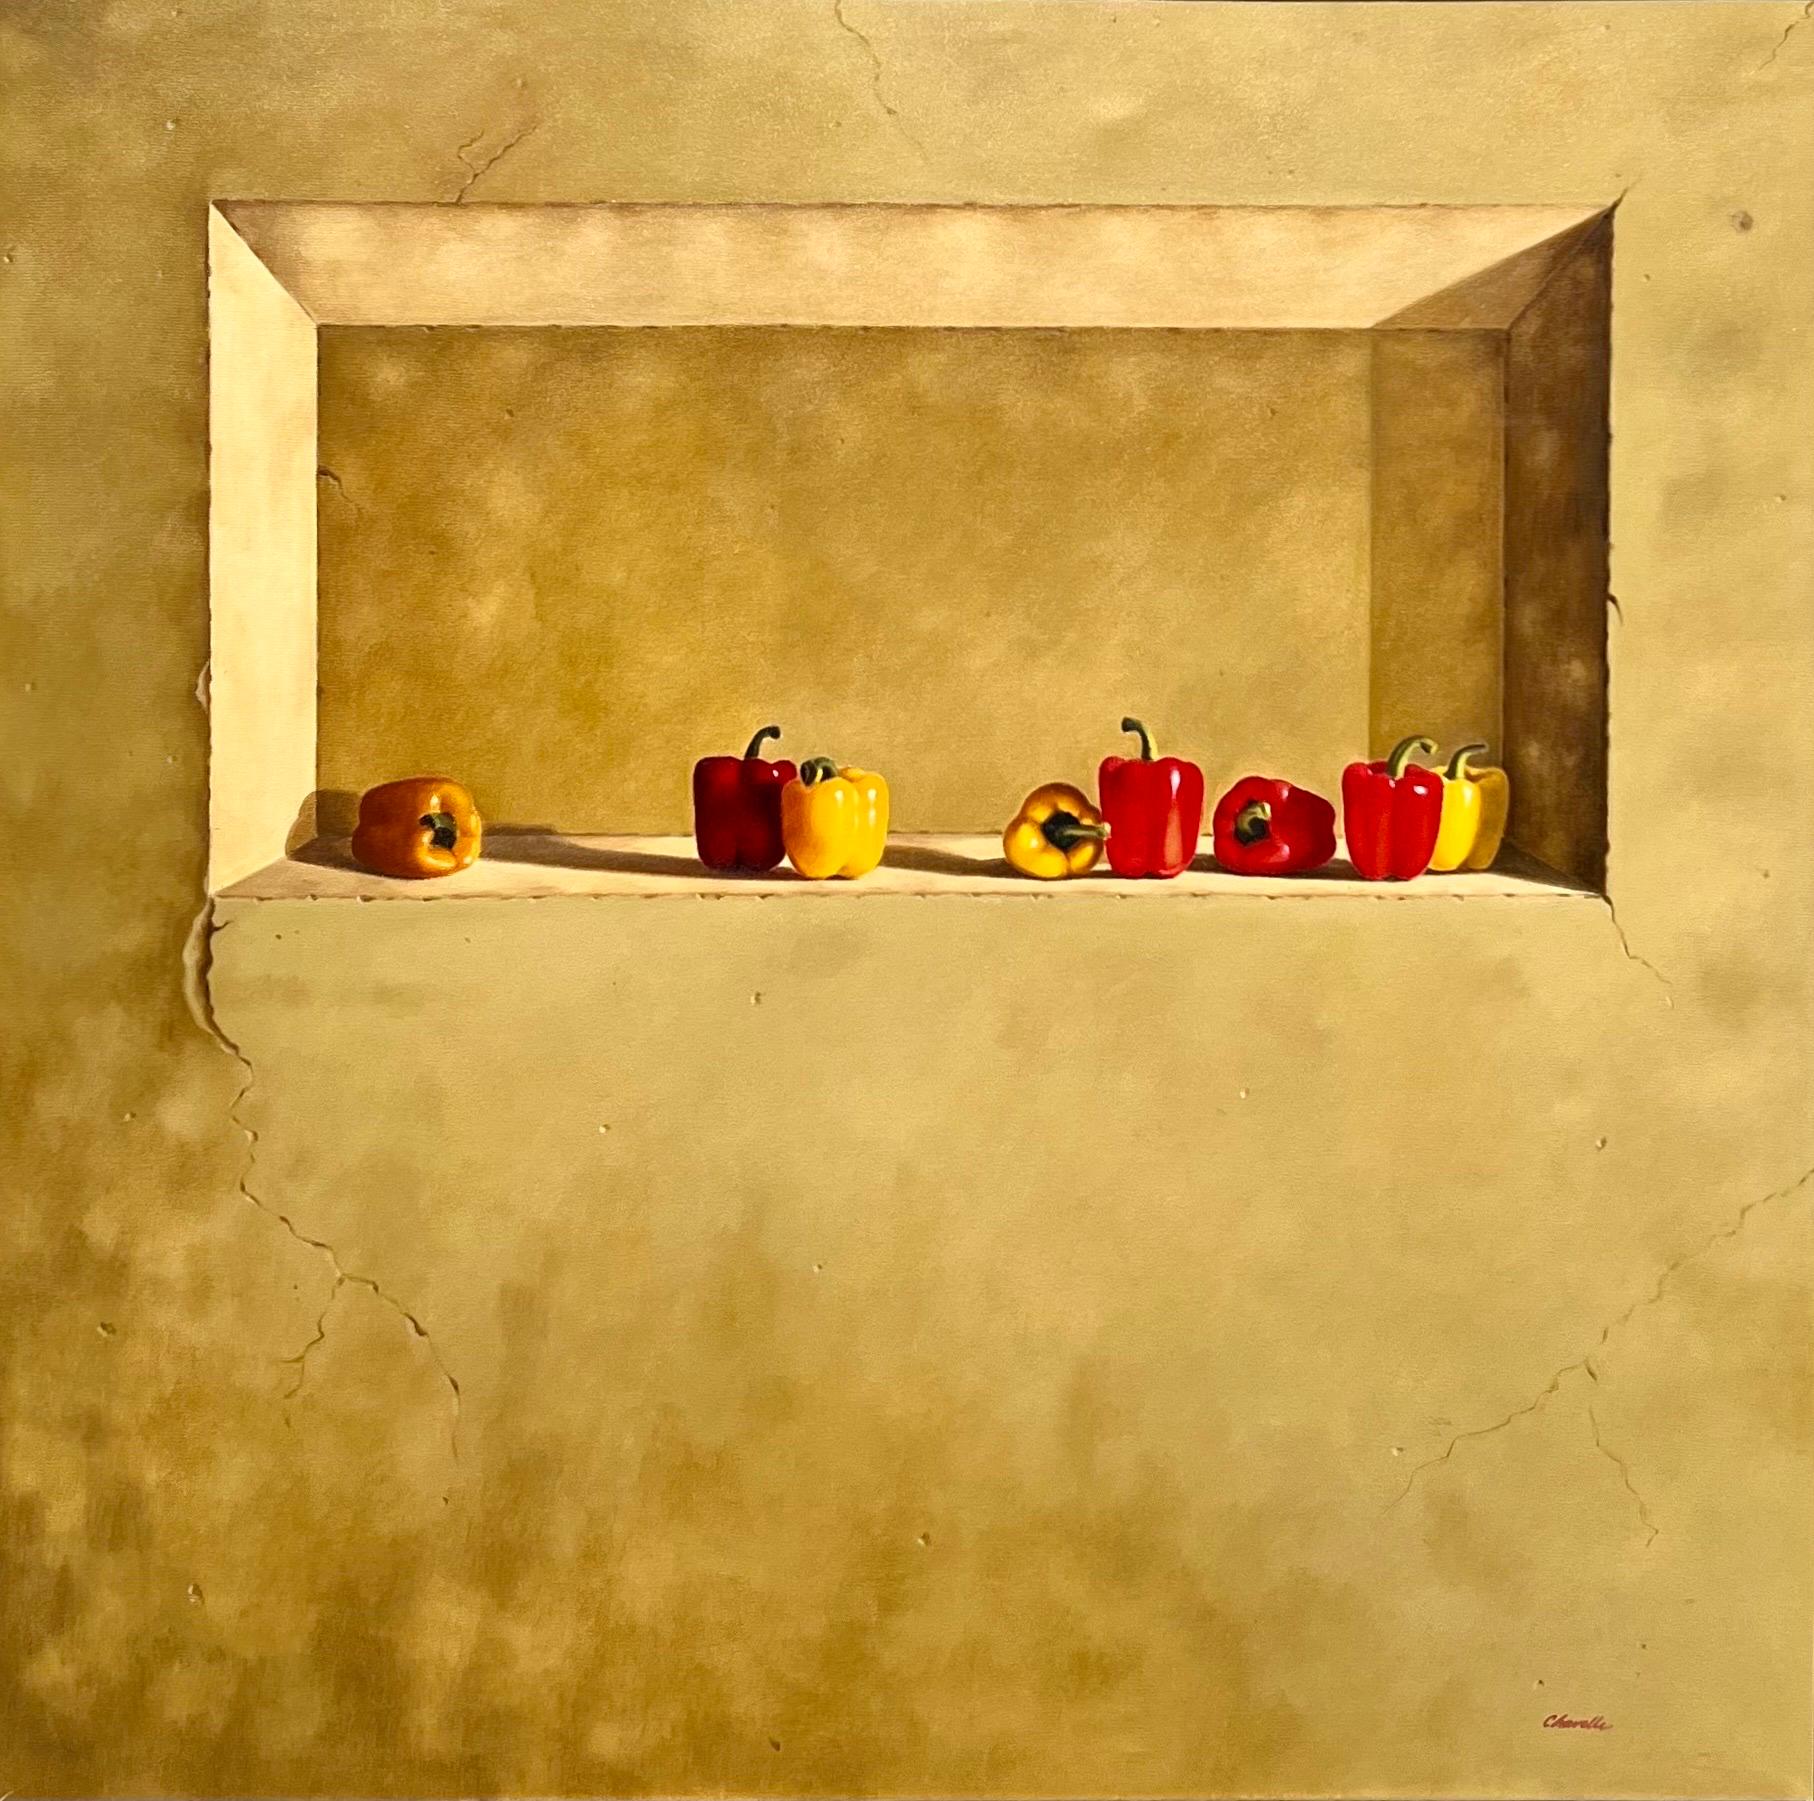 Monumental Hyper Realist Still Life Painting Of Peppers, 
Hand Signed
Oil on canvas
 48 x 48 in, 58 x 58 in (framed)
Perfect for a kitchen, A colorful display of red and yellow peppers on a faux, Trompe L'oeil cracked farmhouse or châteaux wall.